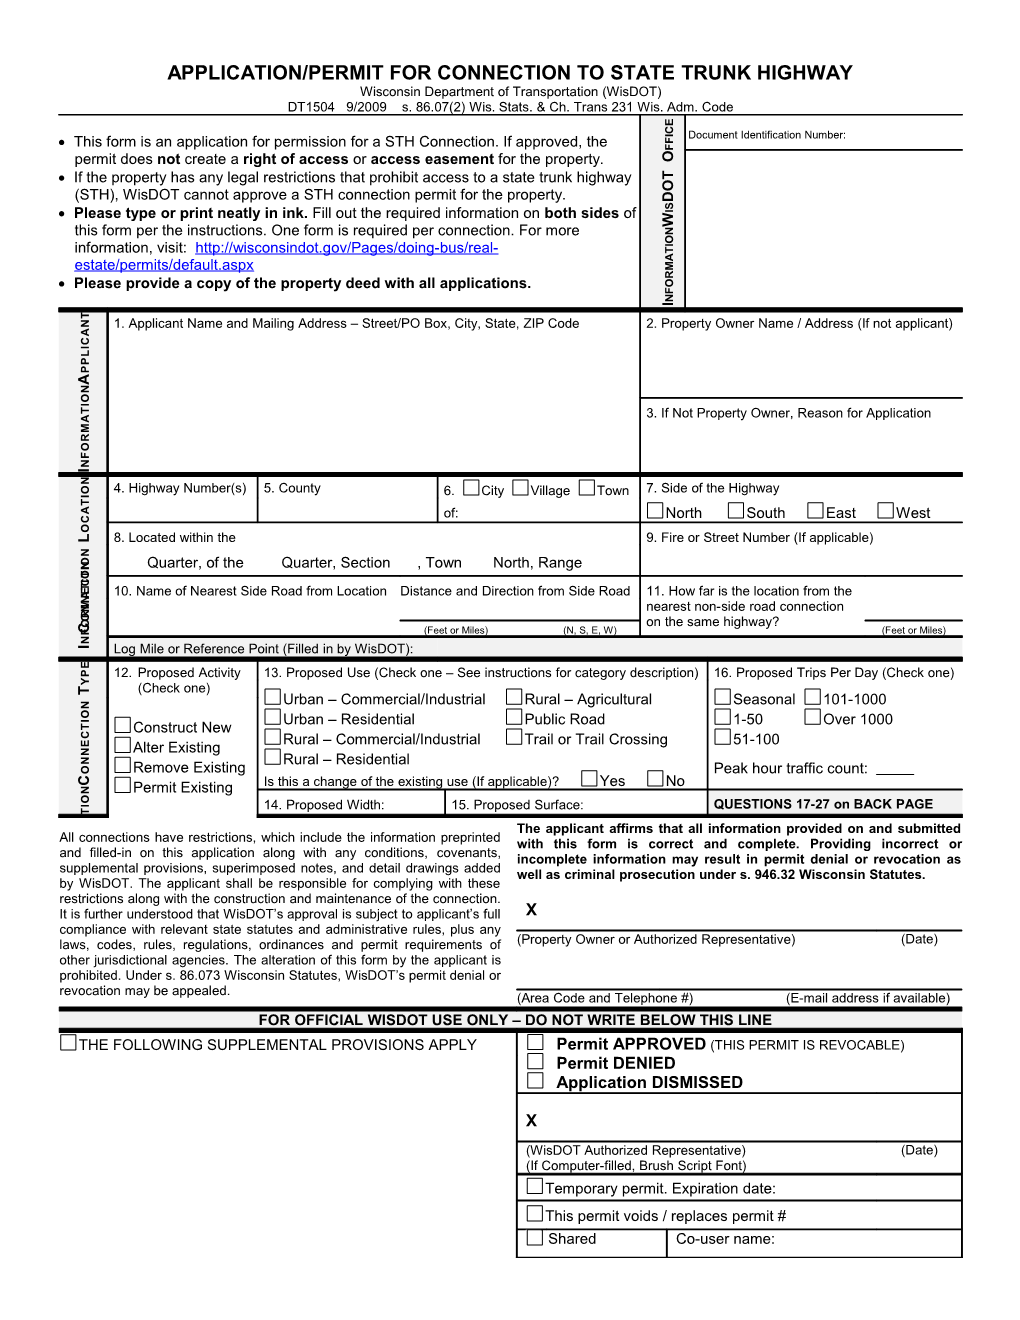 DT1504 Application/Permit for Connection to State Trunk Highway